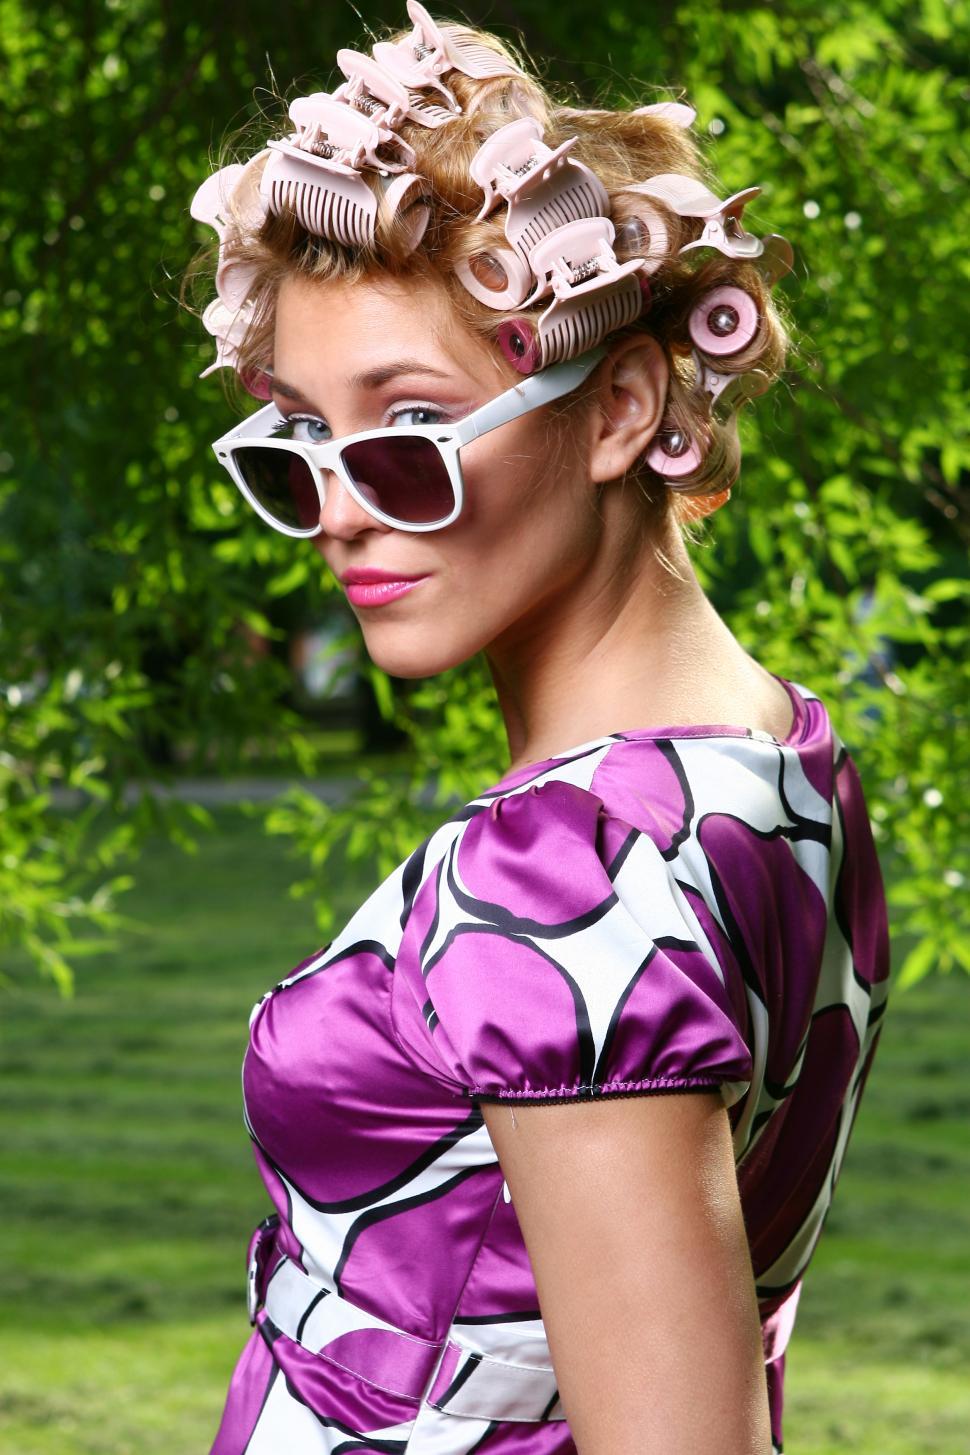 Free Image of coy young woman looking over sunglasses 